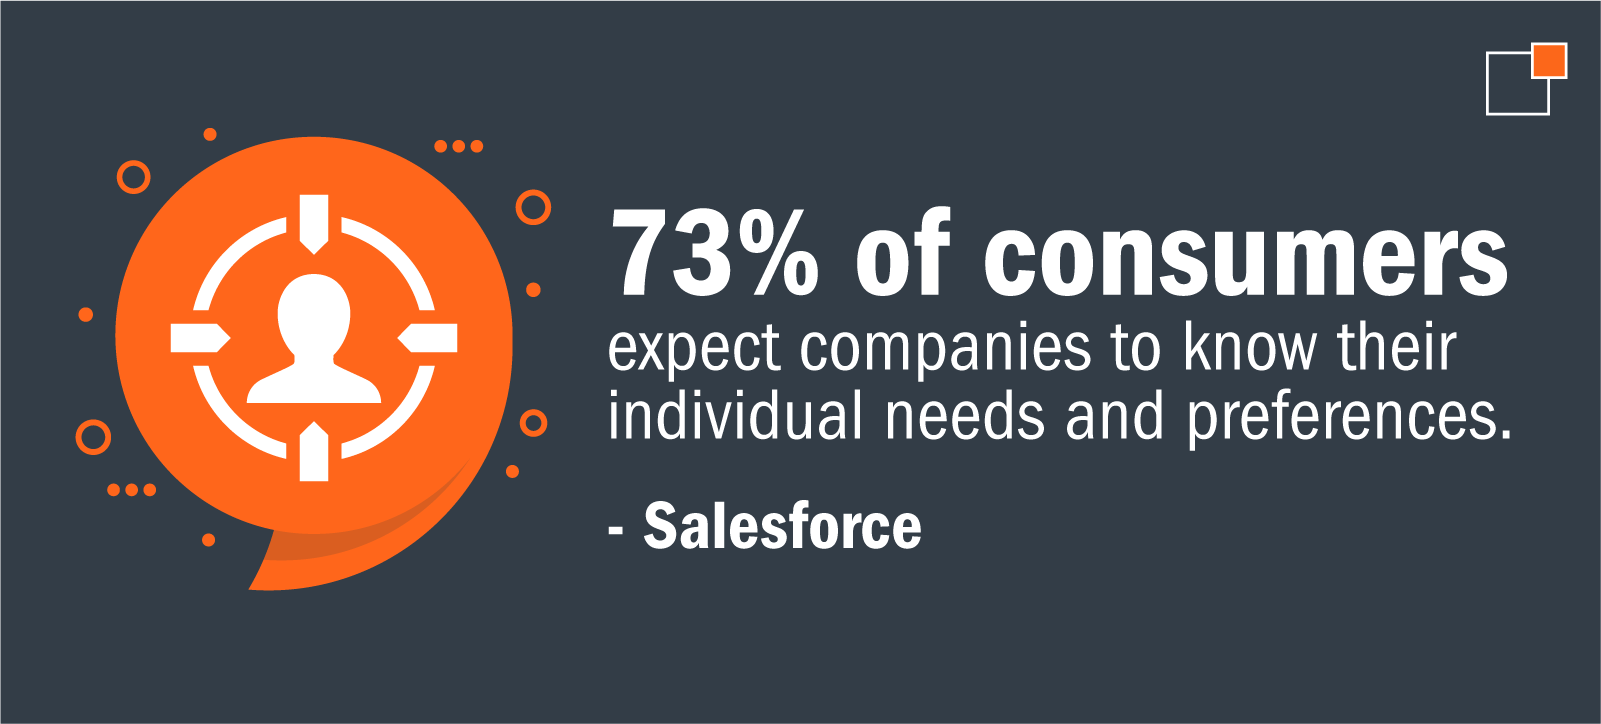 73%25 of consumers expect companies to know their individual needs and preferences. - Salesforce